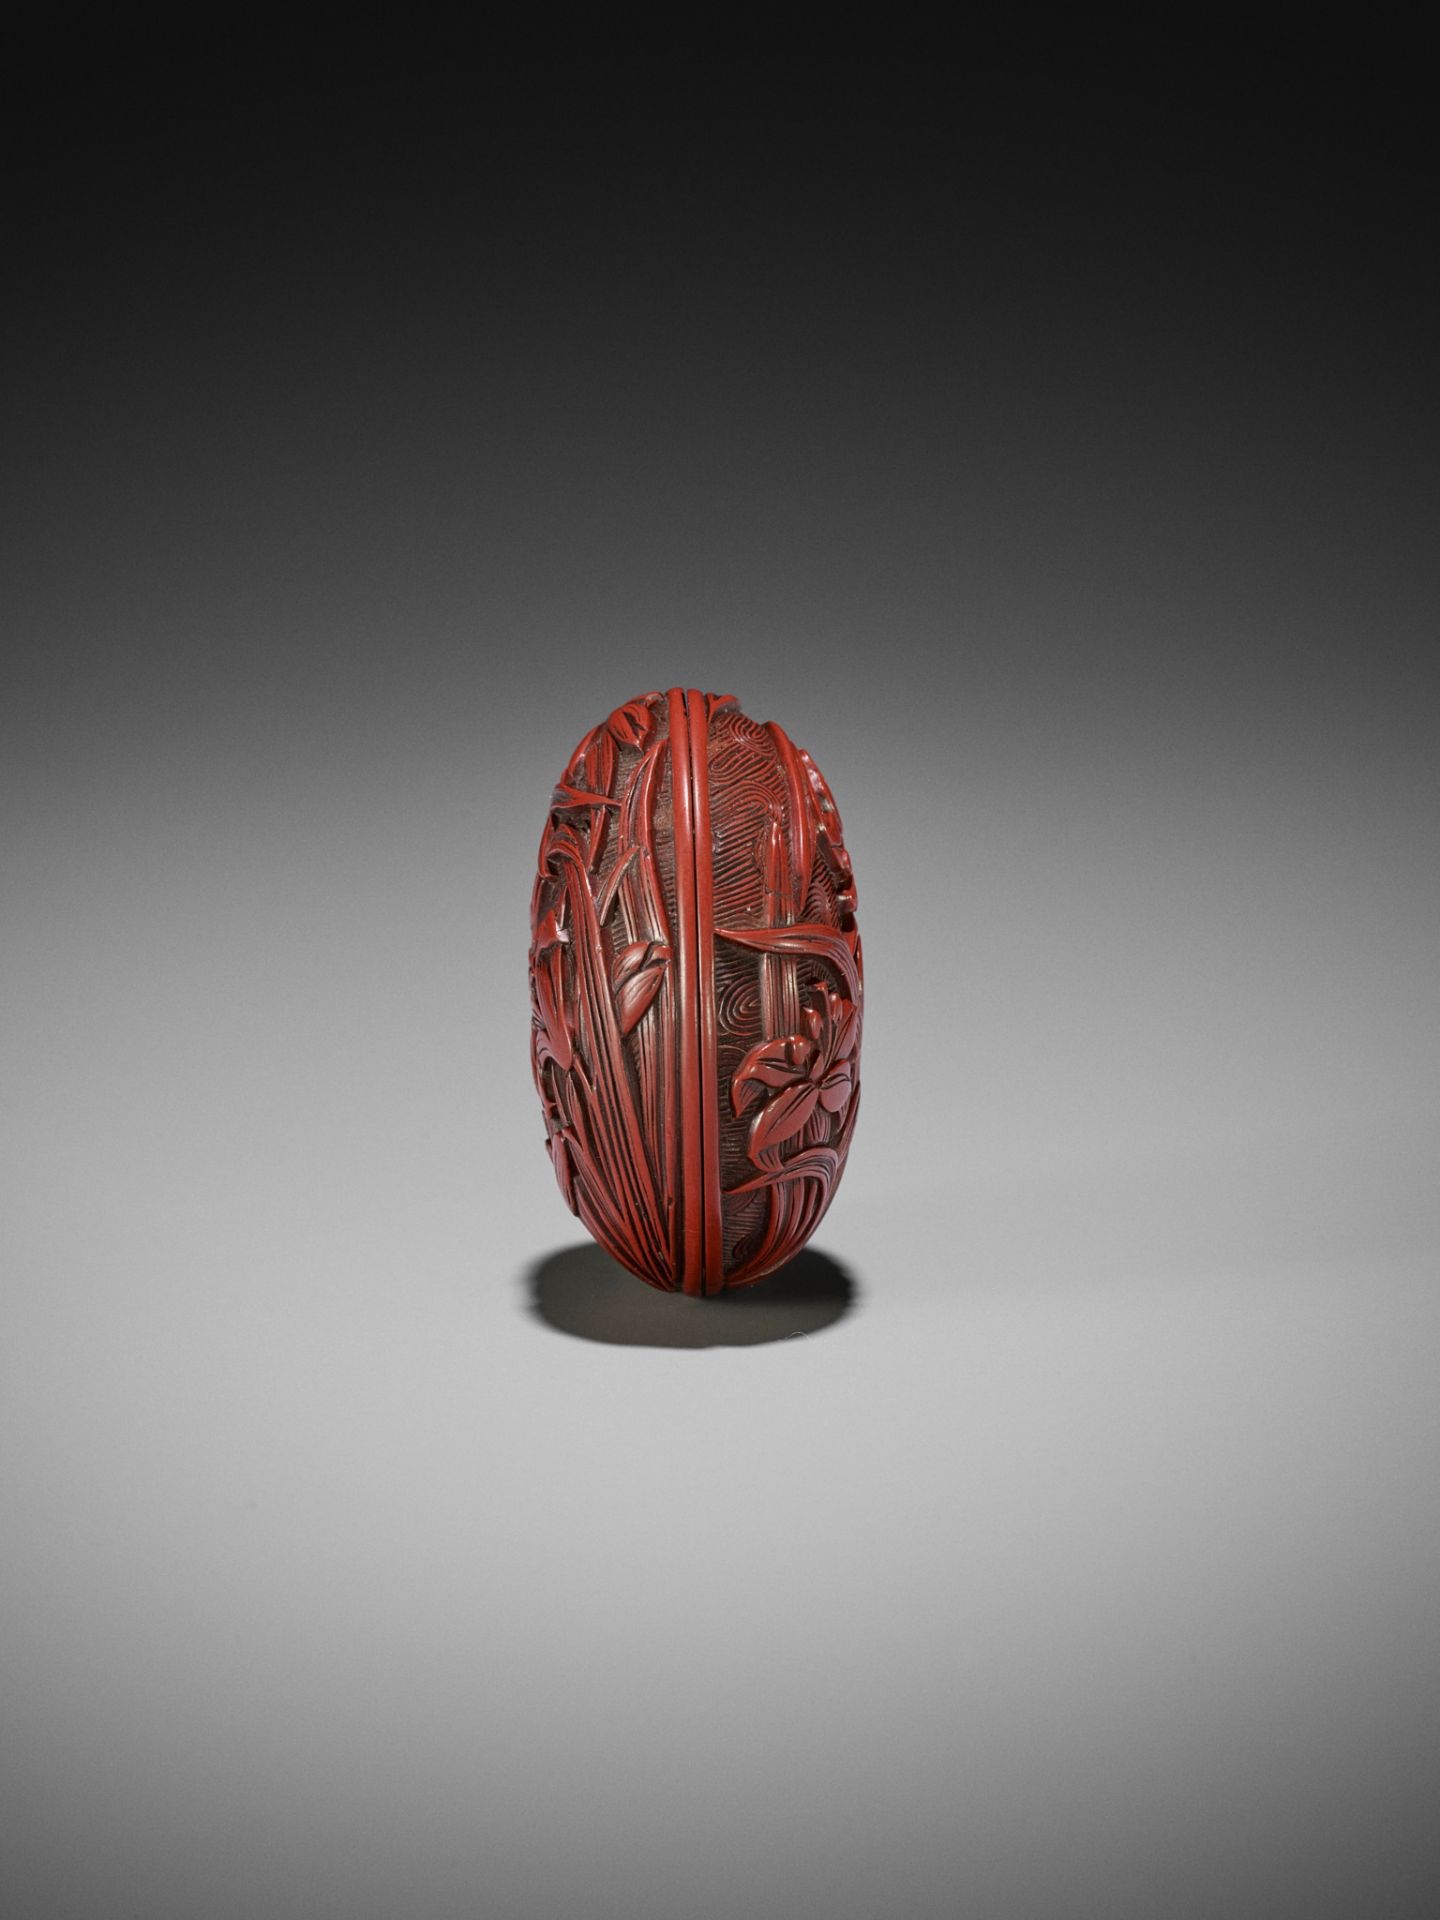 A FINE TSUISHU (CARVED RED LACQUER) MANJU NETSUKE WITH LILIES - Image 5 of 8